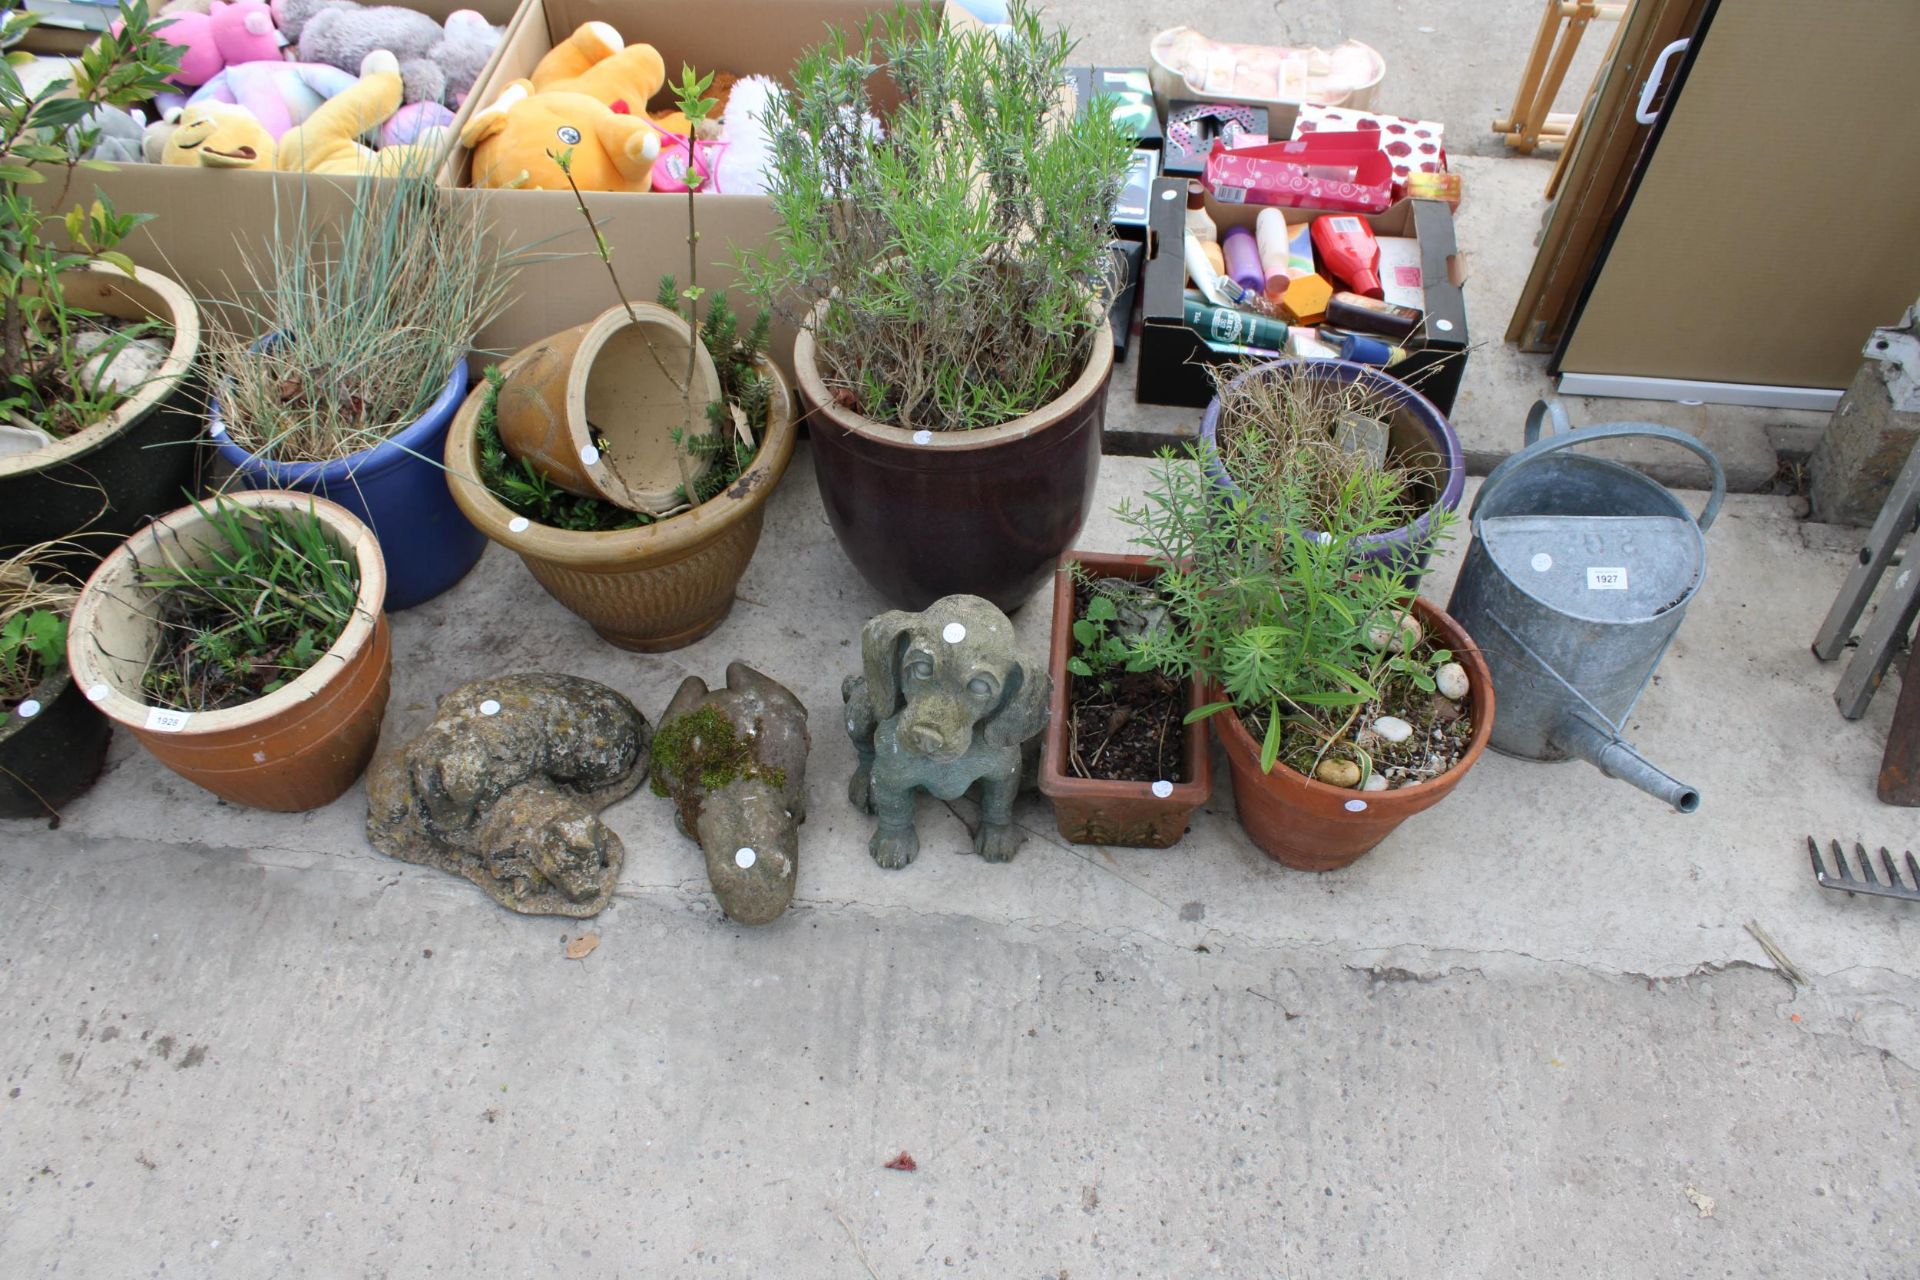 AN ASSORTMENT OF GARDEN ITEMS TO INCLUDE THREE CONCRETE FIGURES, GLAZED POTS AND A GALVANISED